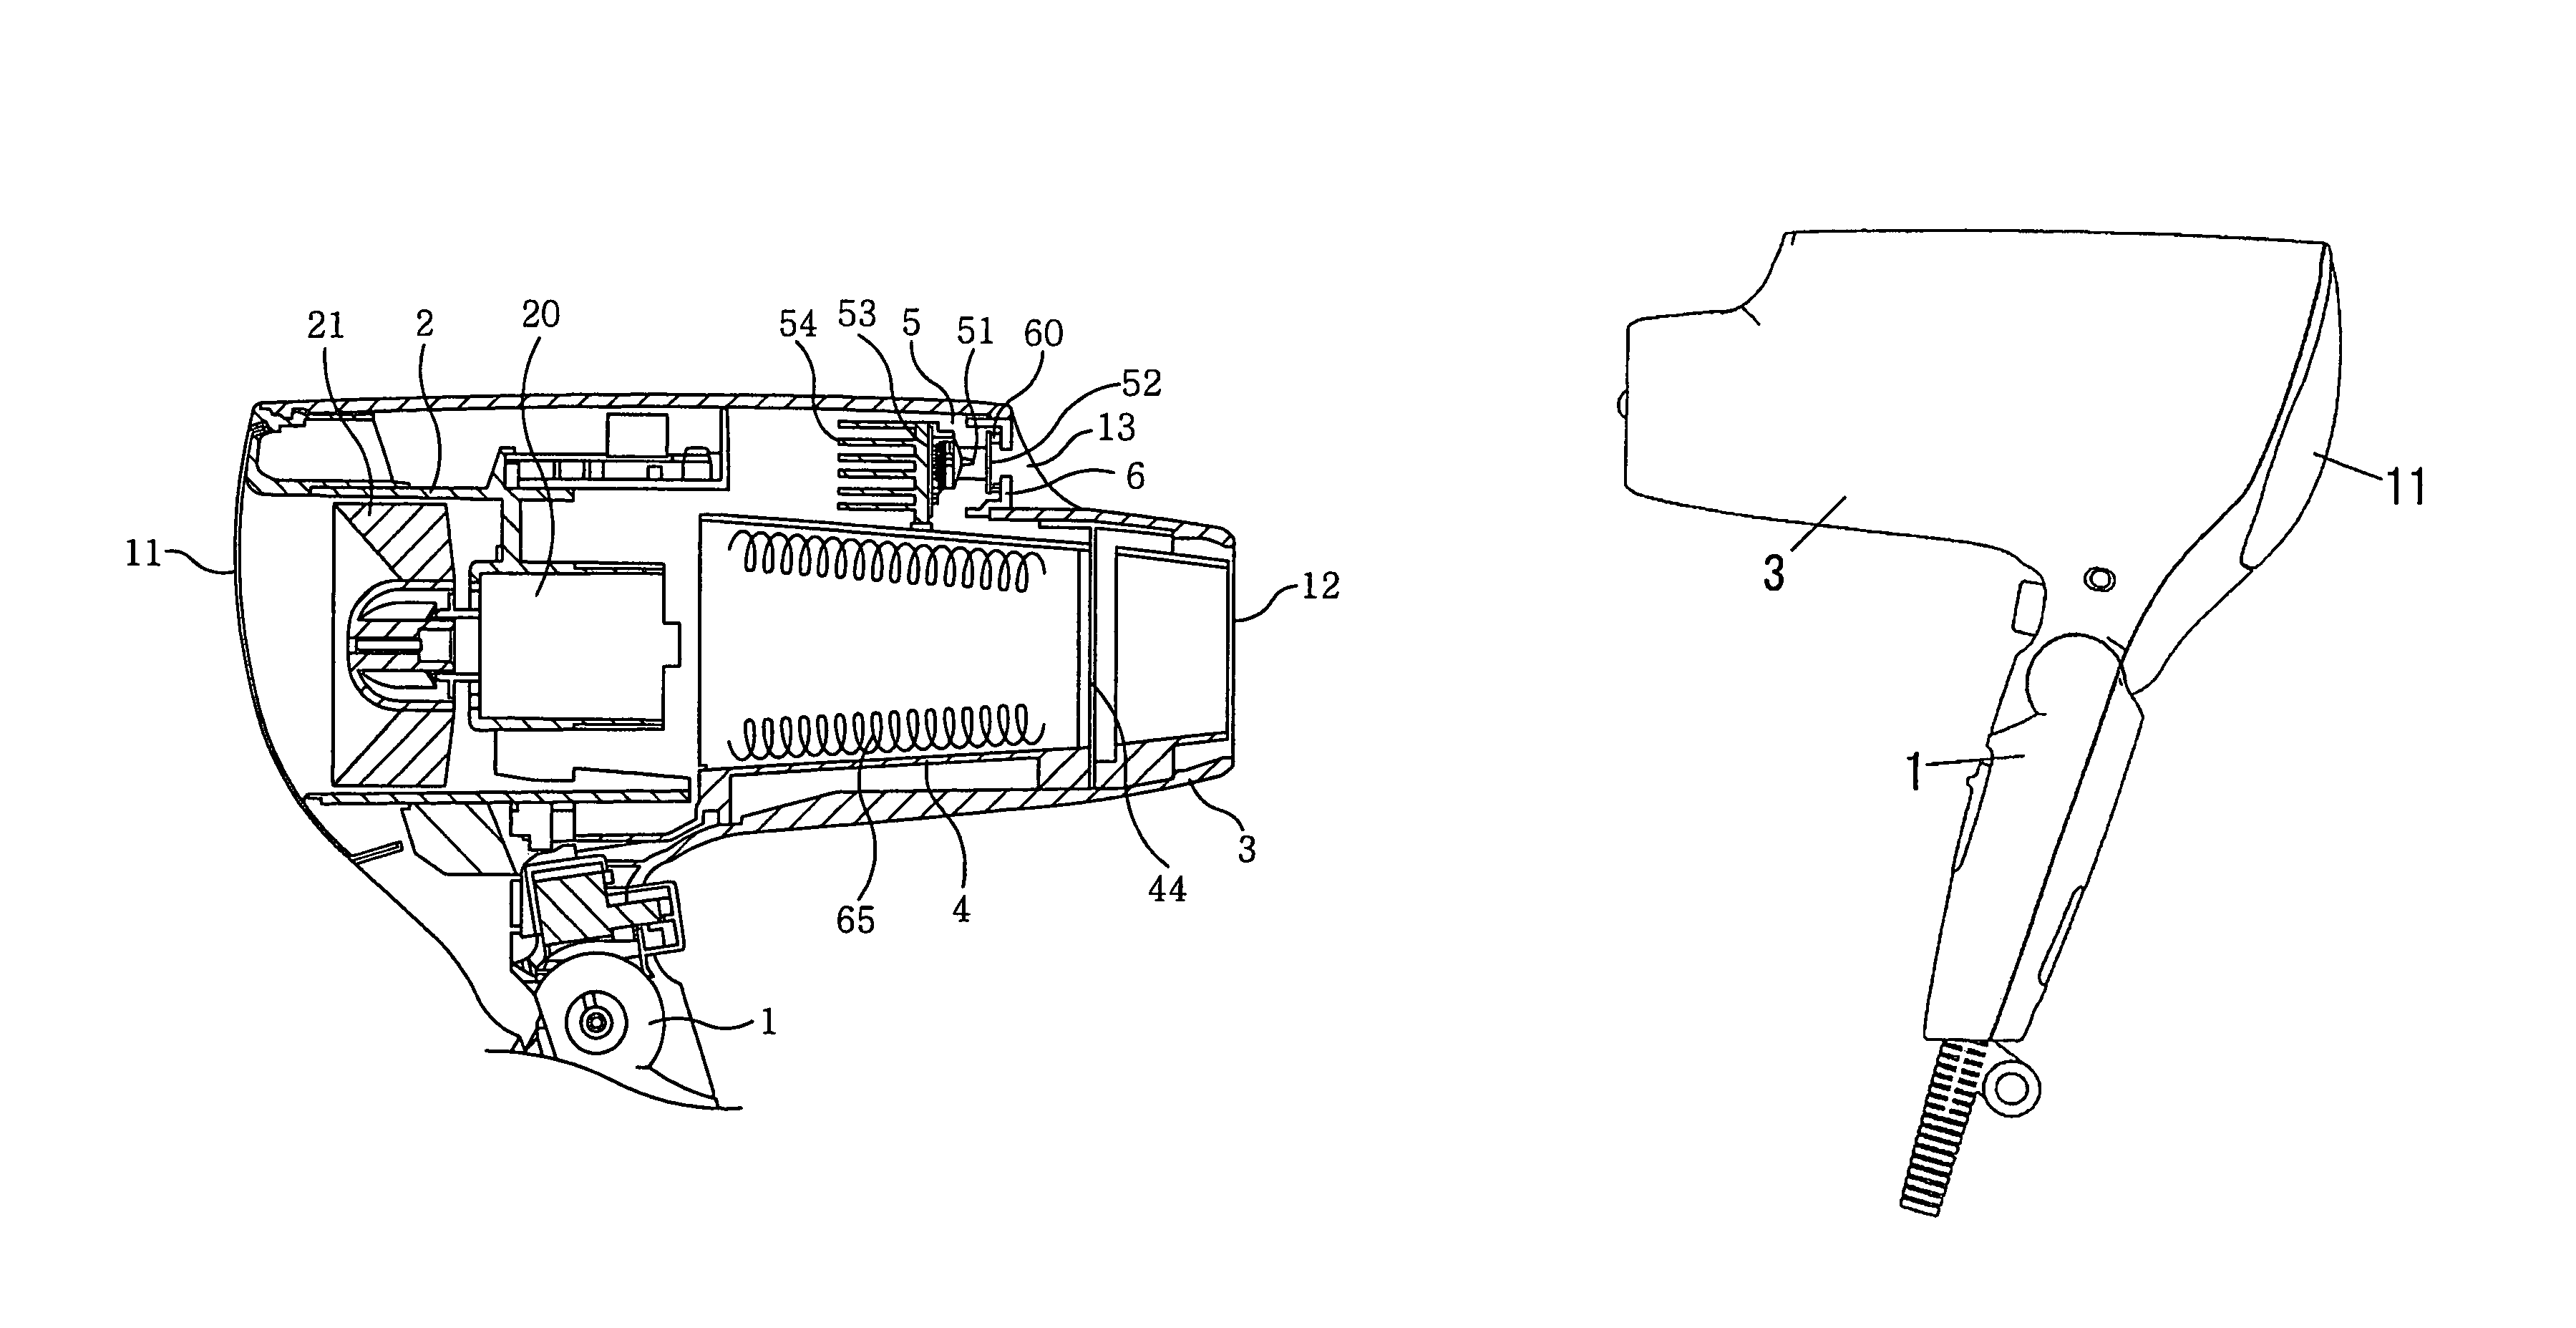 Heating and blowing apparatus